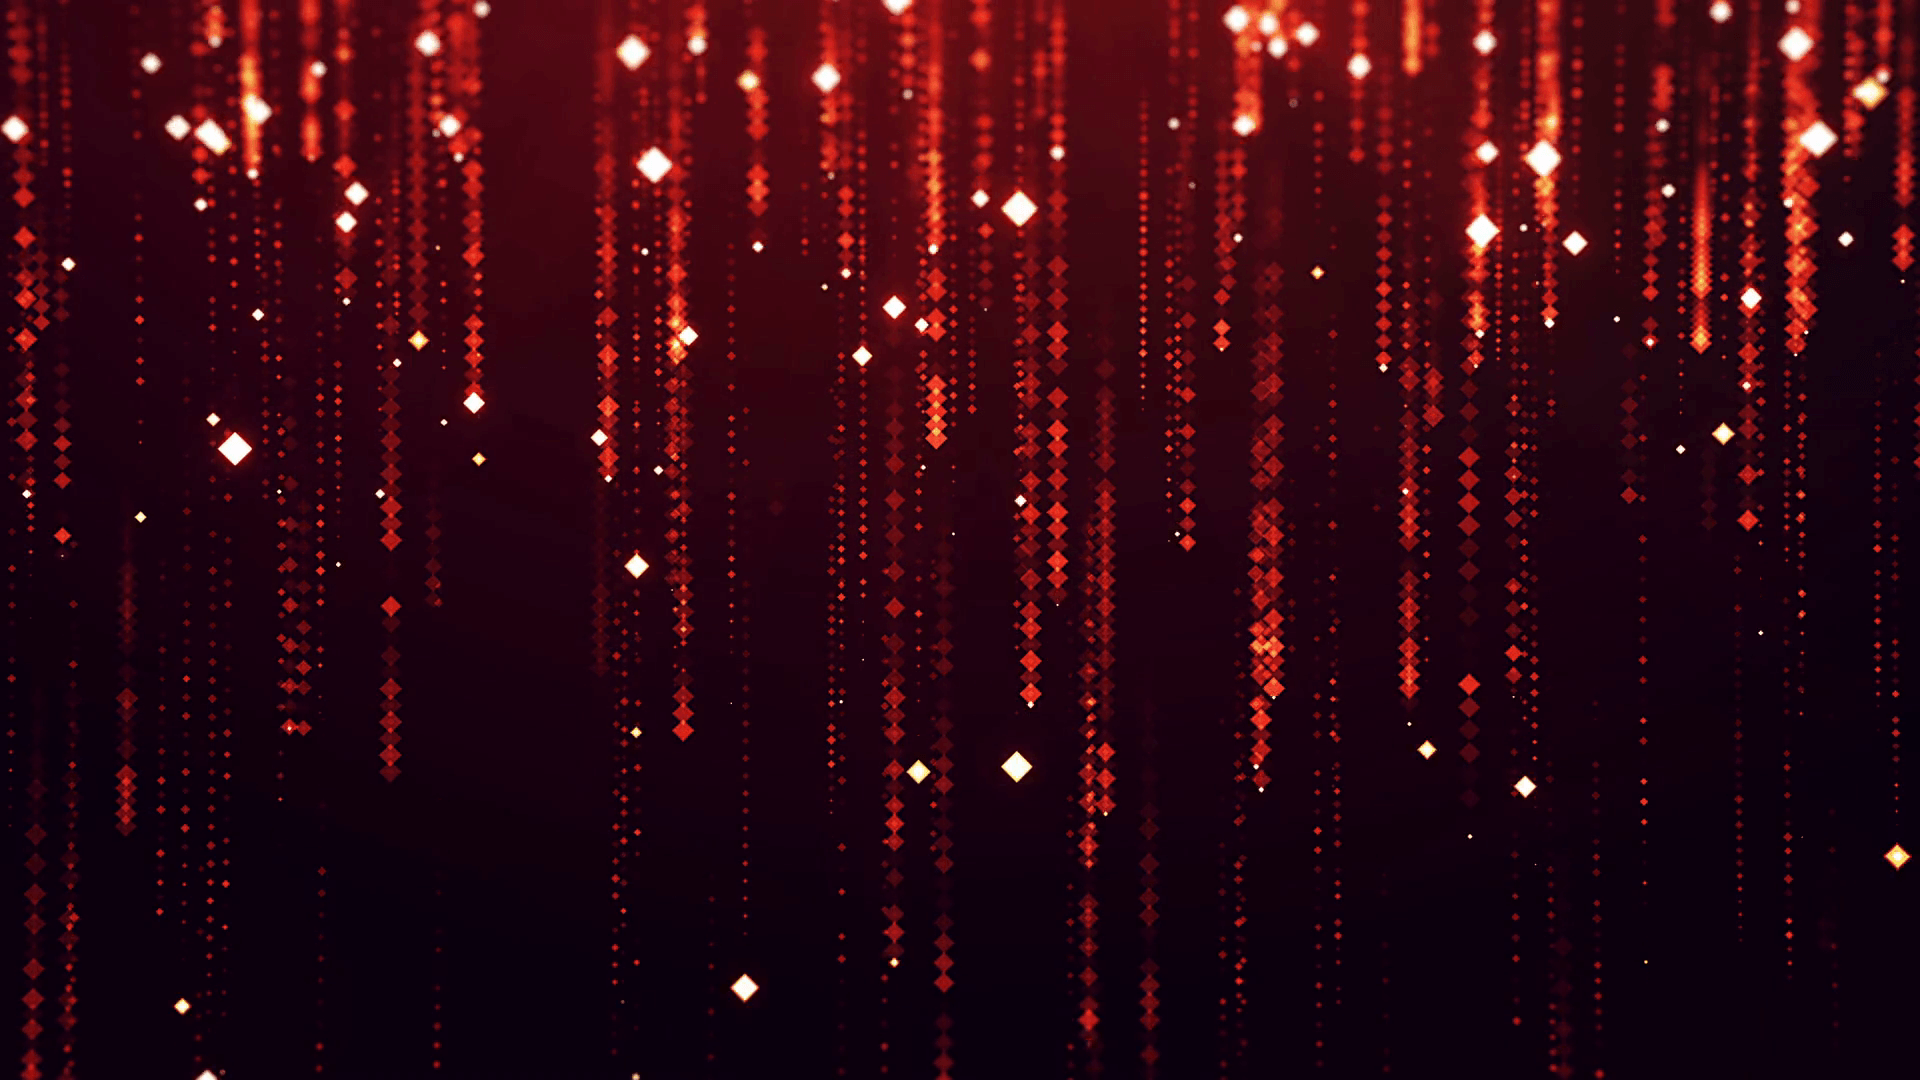 Abstract computer animated background with small glowing particles